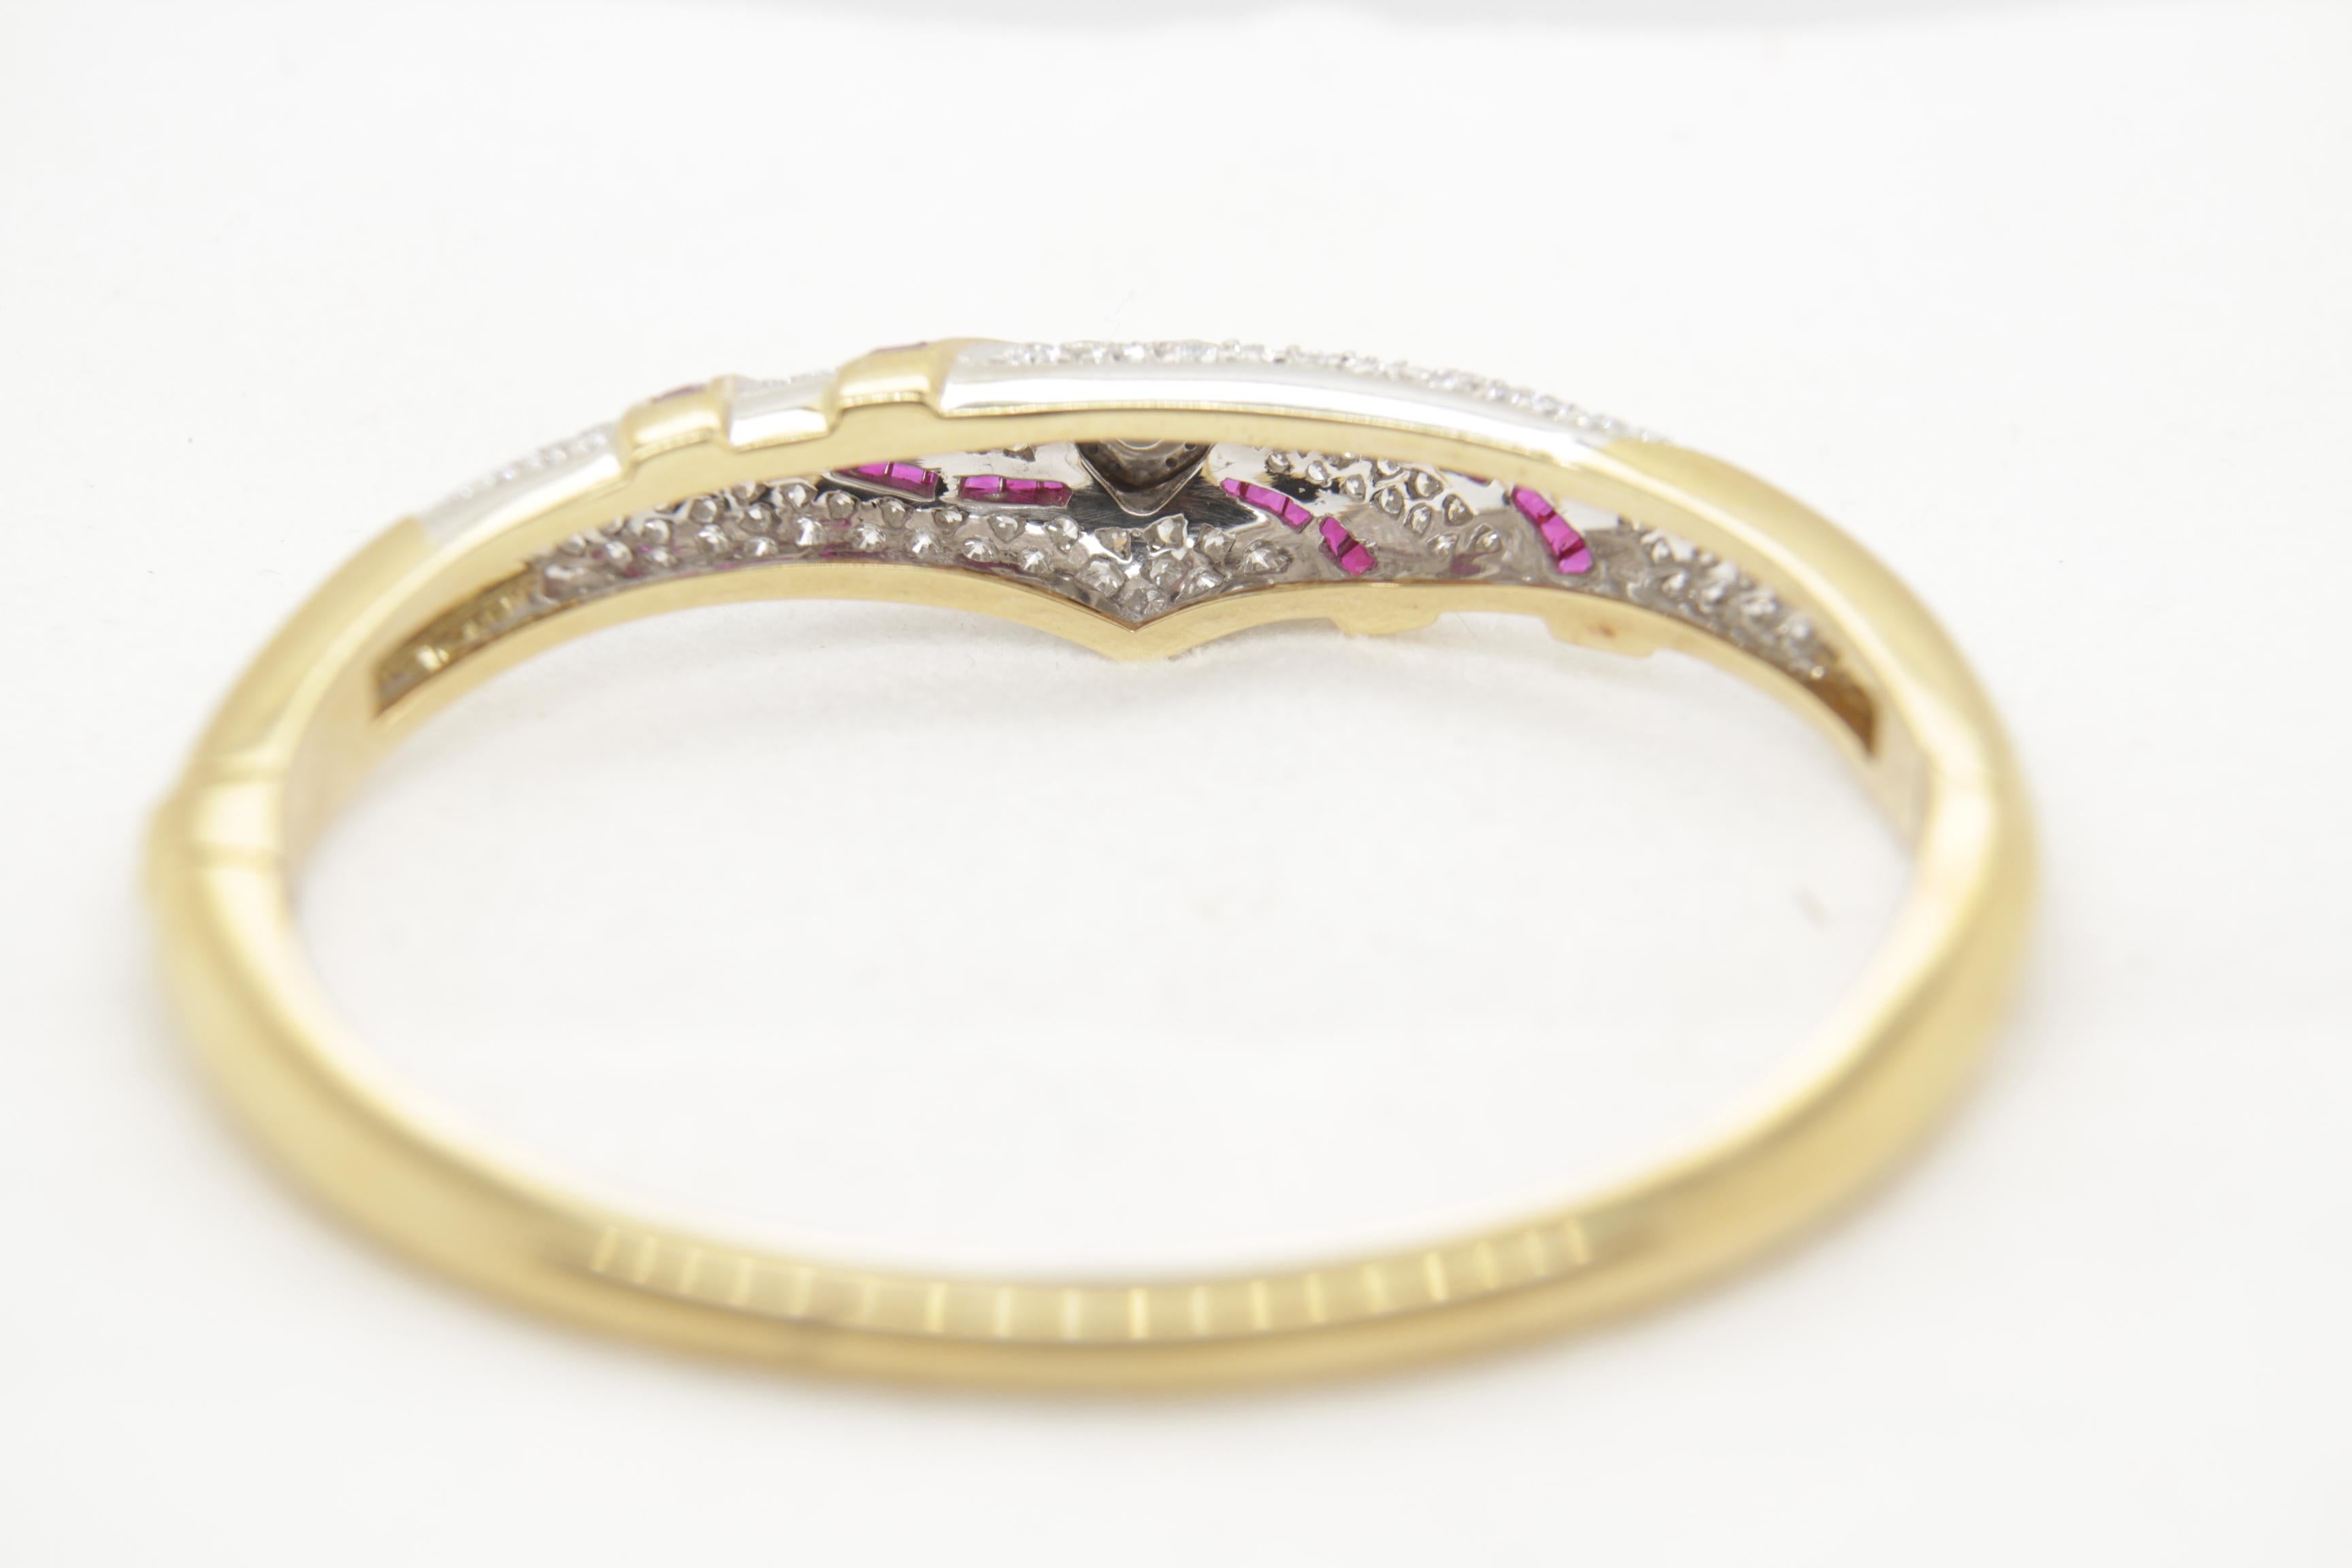 3.48 Carat Diamond and Ruby Bangle in 18 Karat Gold For Sale 4